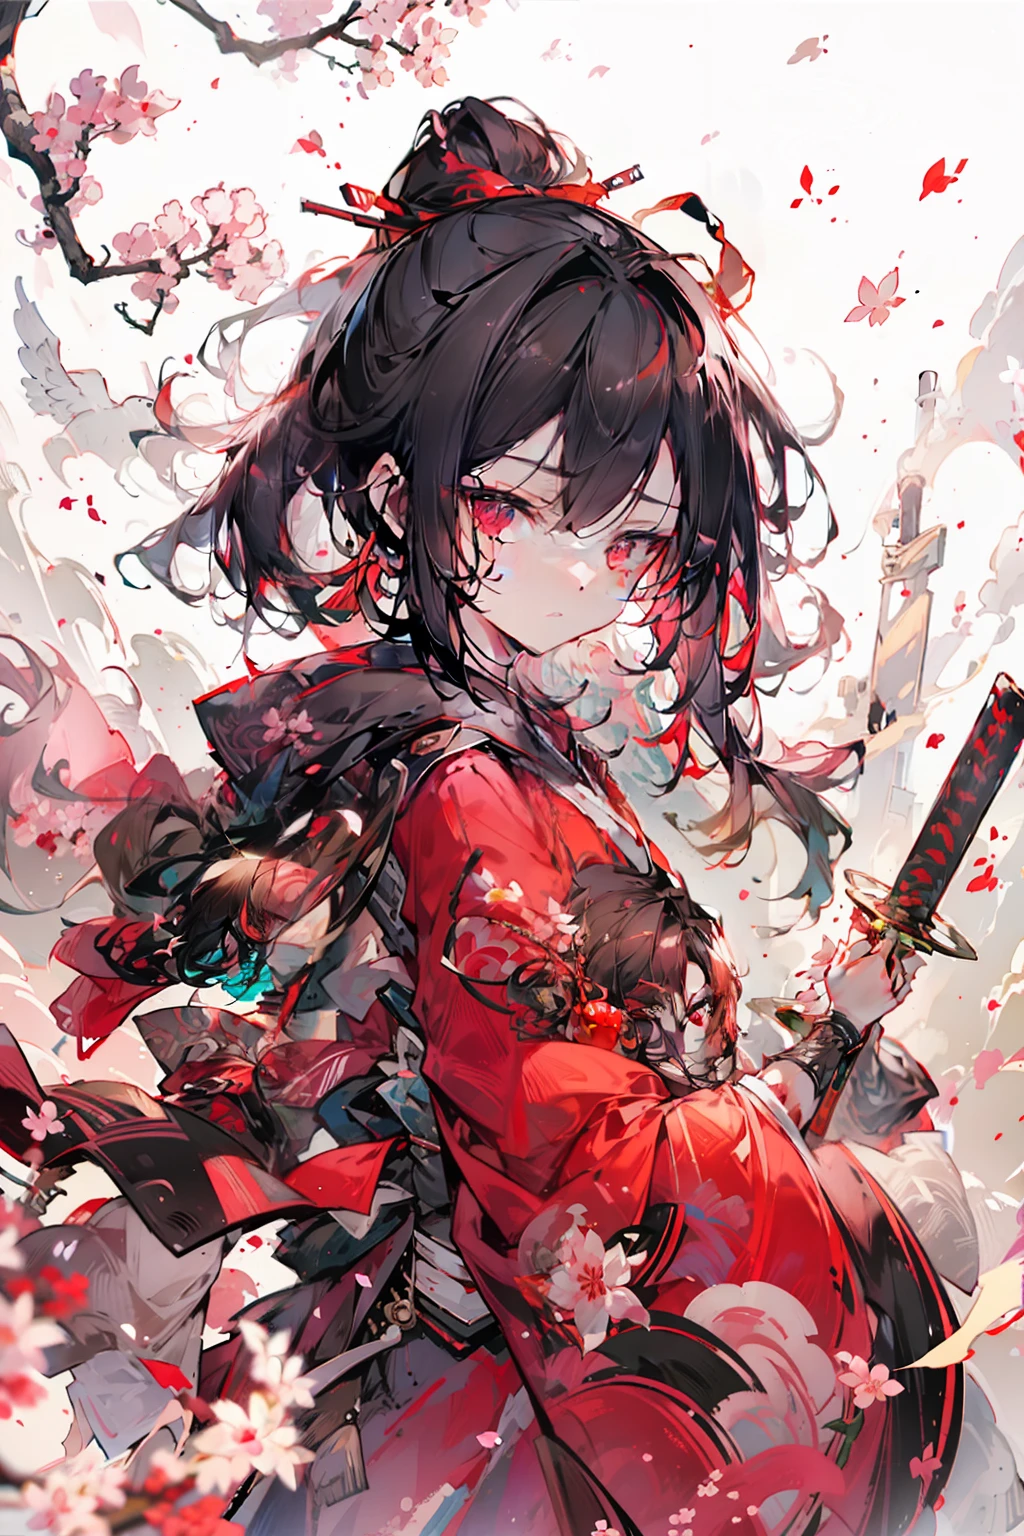 1 boy、nightcity、Sateen、Kimono without sleeves、A dark-haired、Holding a weapon with blood on it、Looking at the camera、Cherry blossoms are dancing